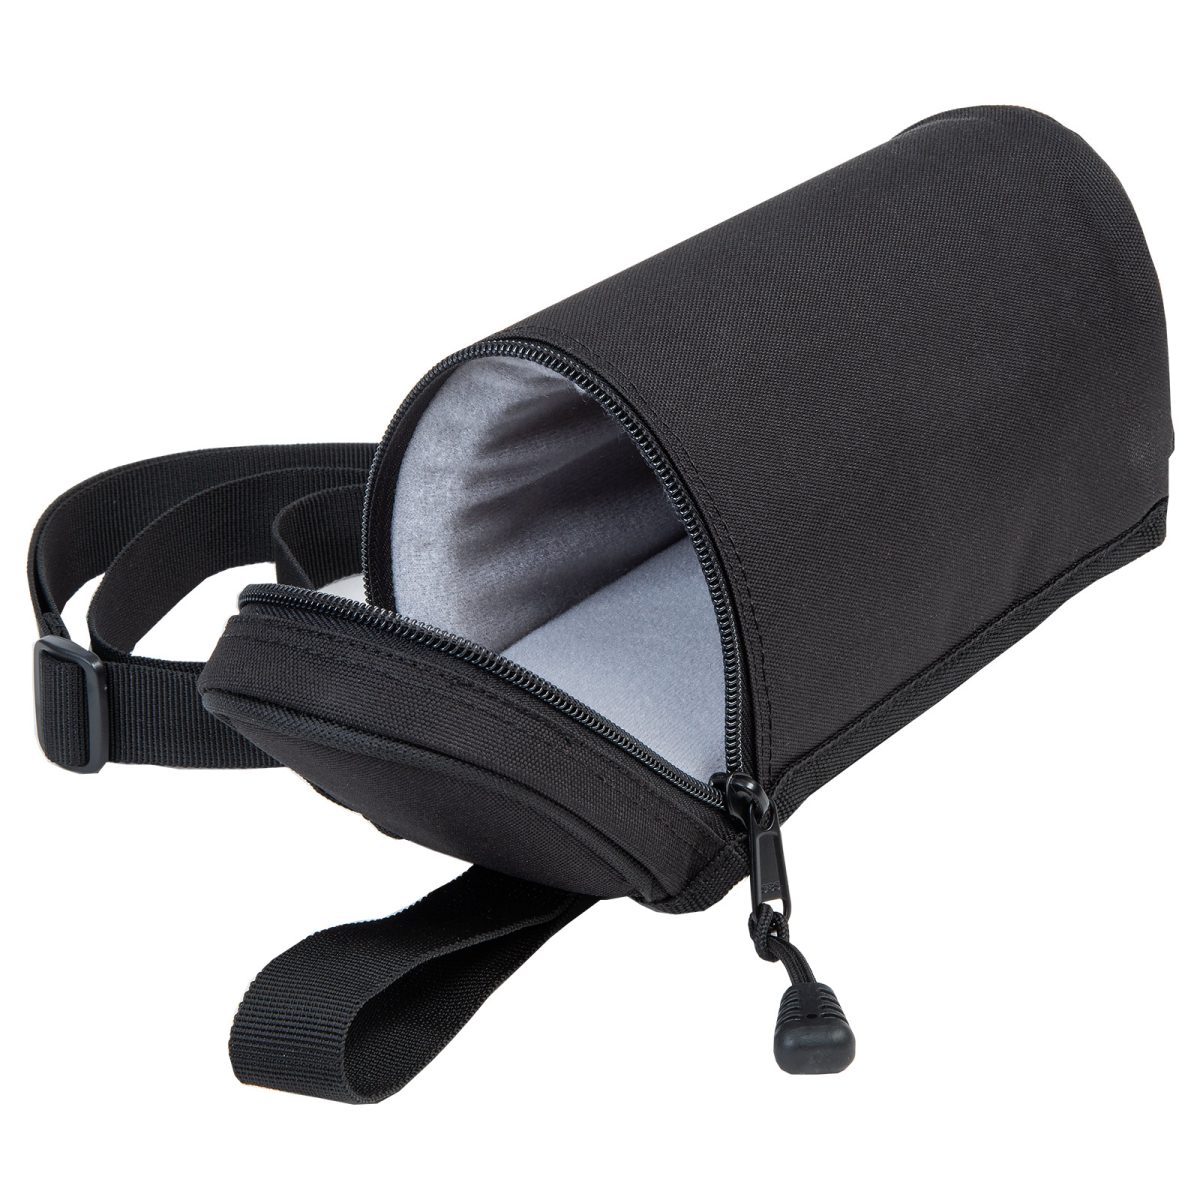 Protective bag for thermal imaging devices